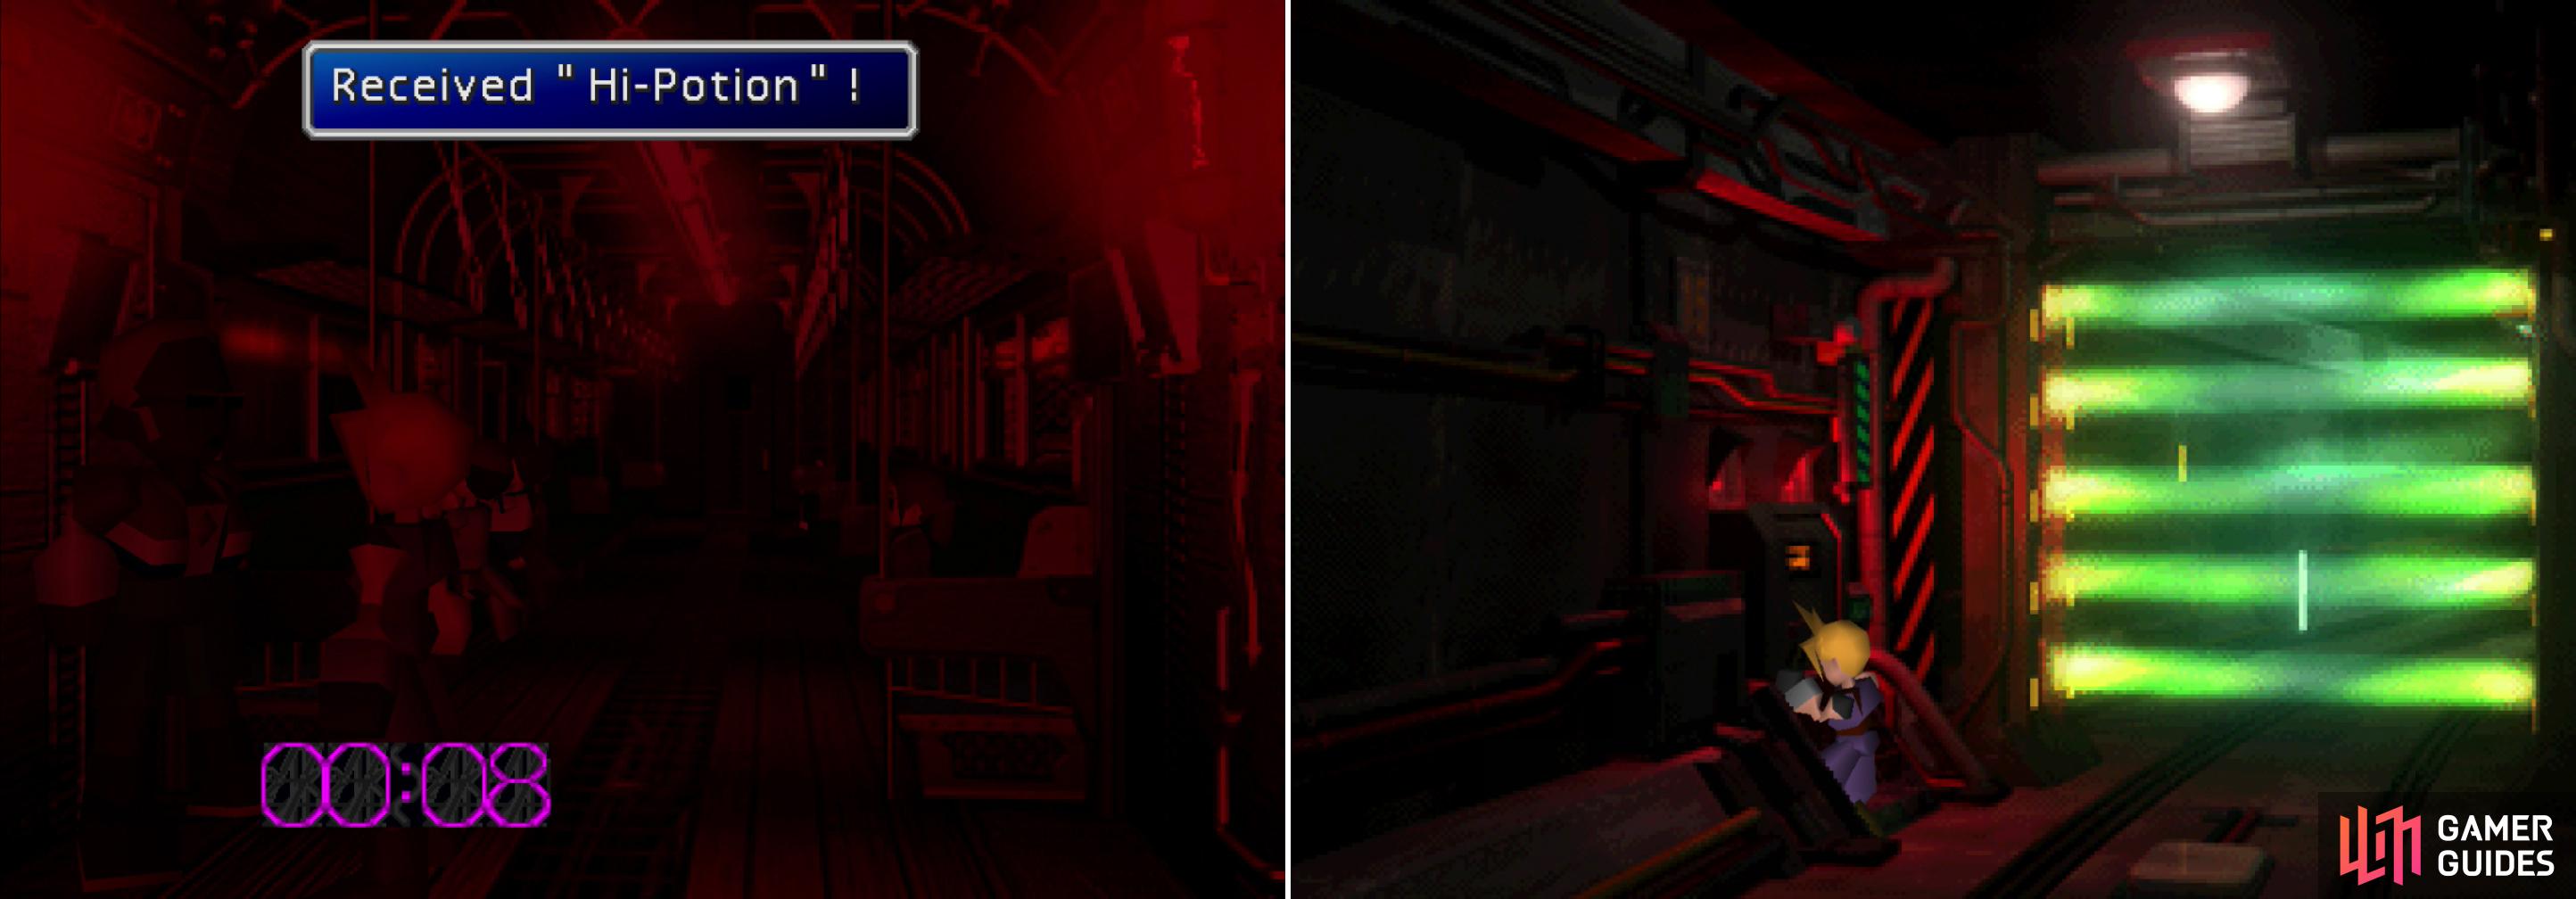 There might be perils on the train when the security alarm goes off, but there are opportunities, as well (left). To get to the reactor you'll have to climb under the plate (right).